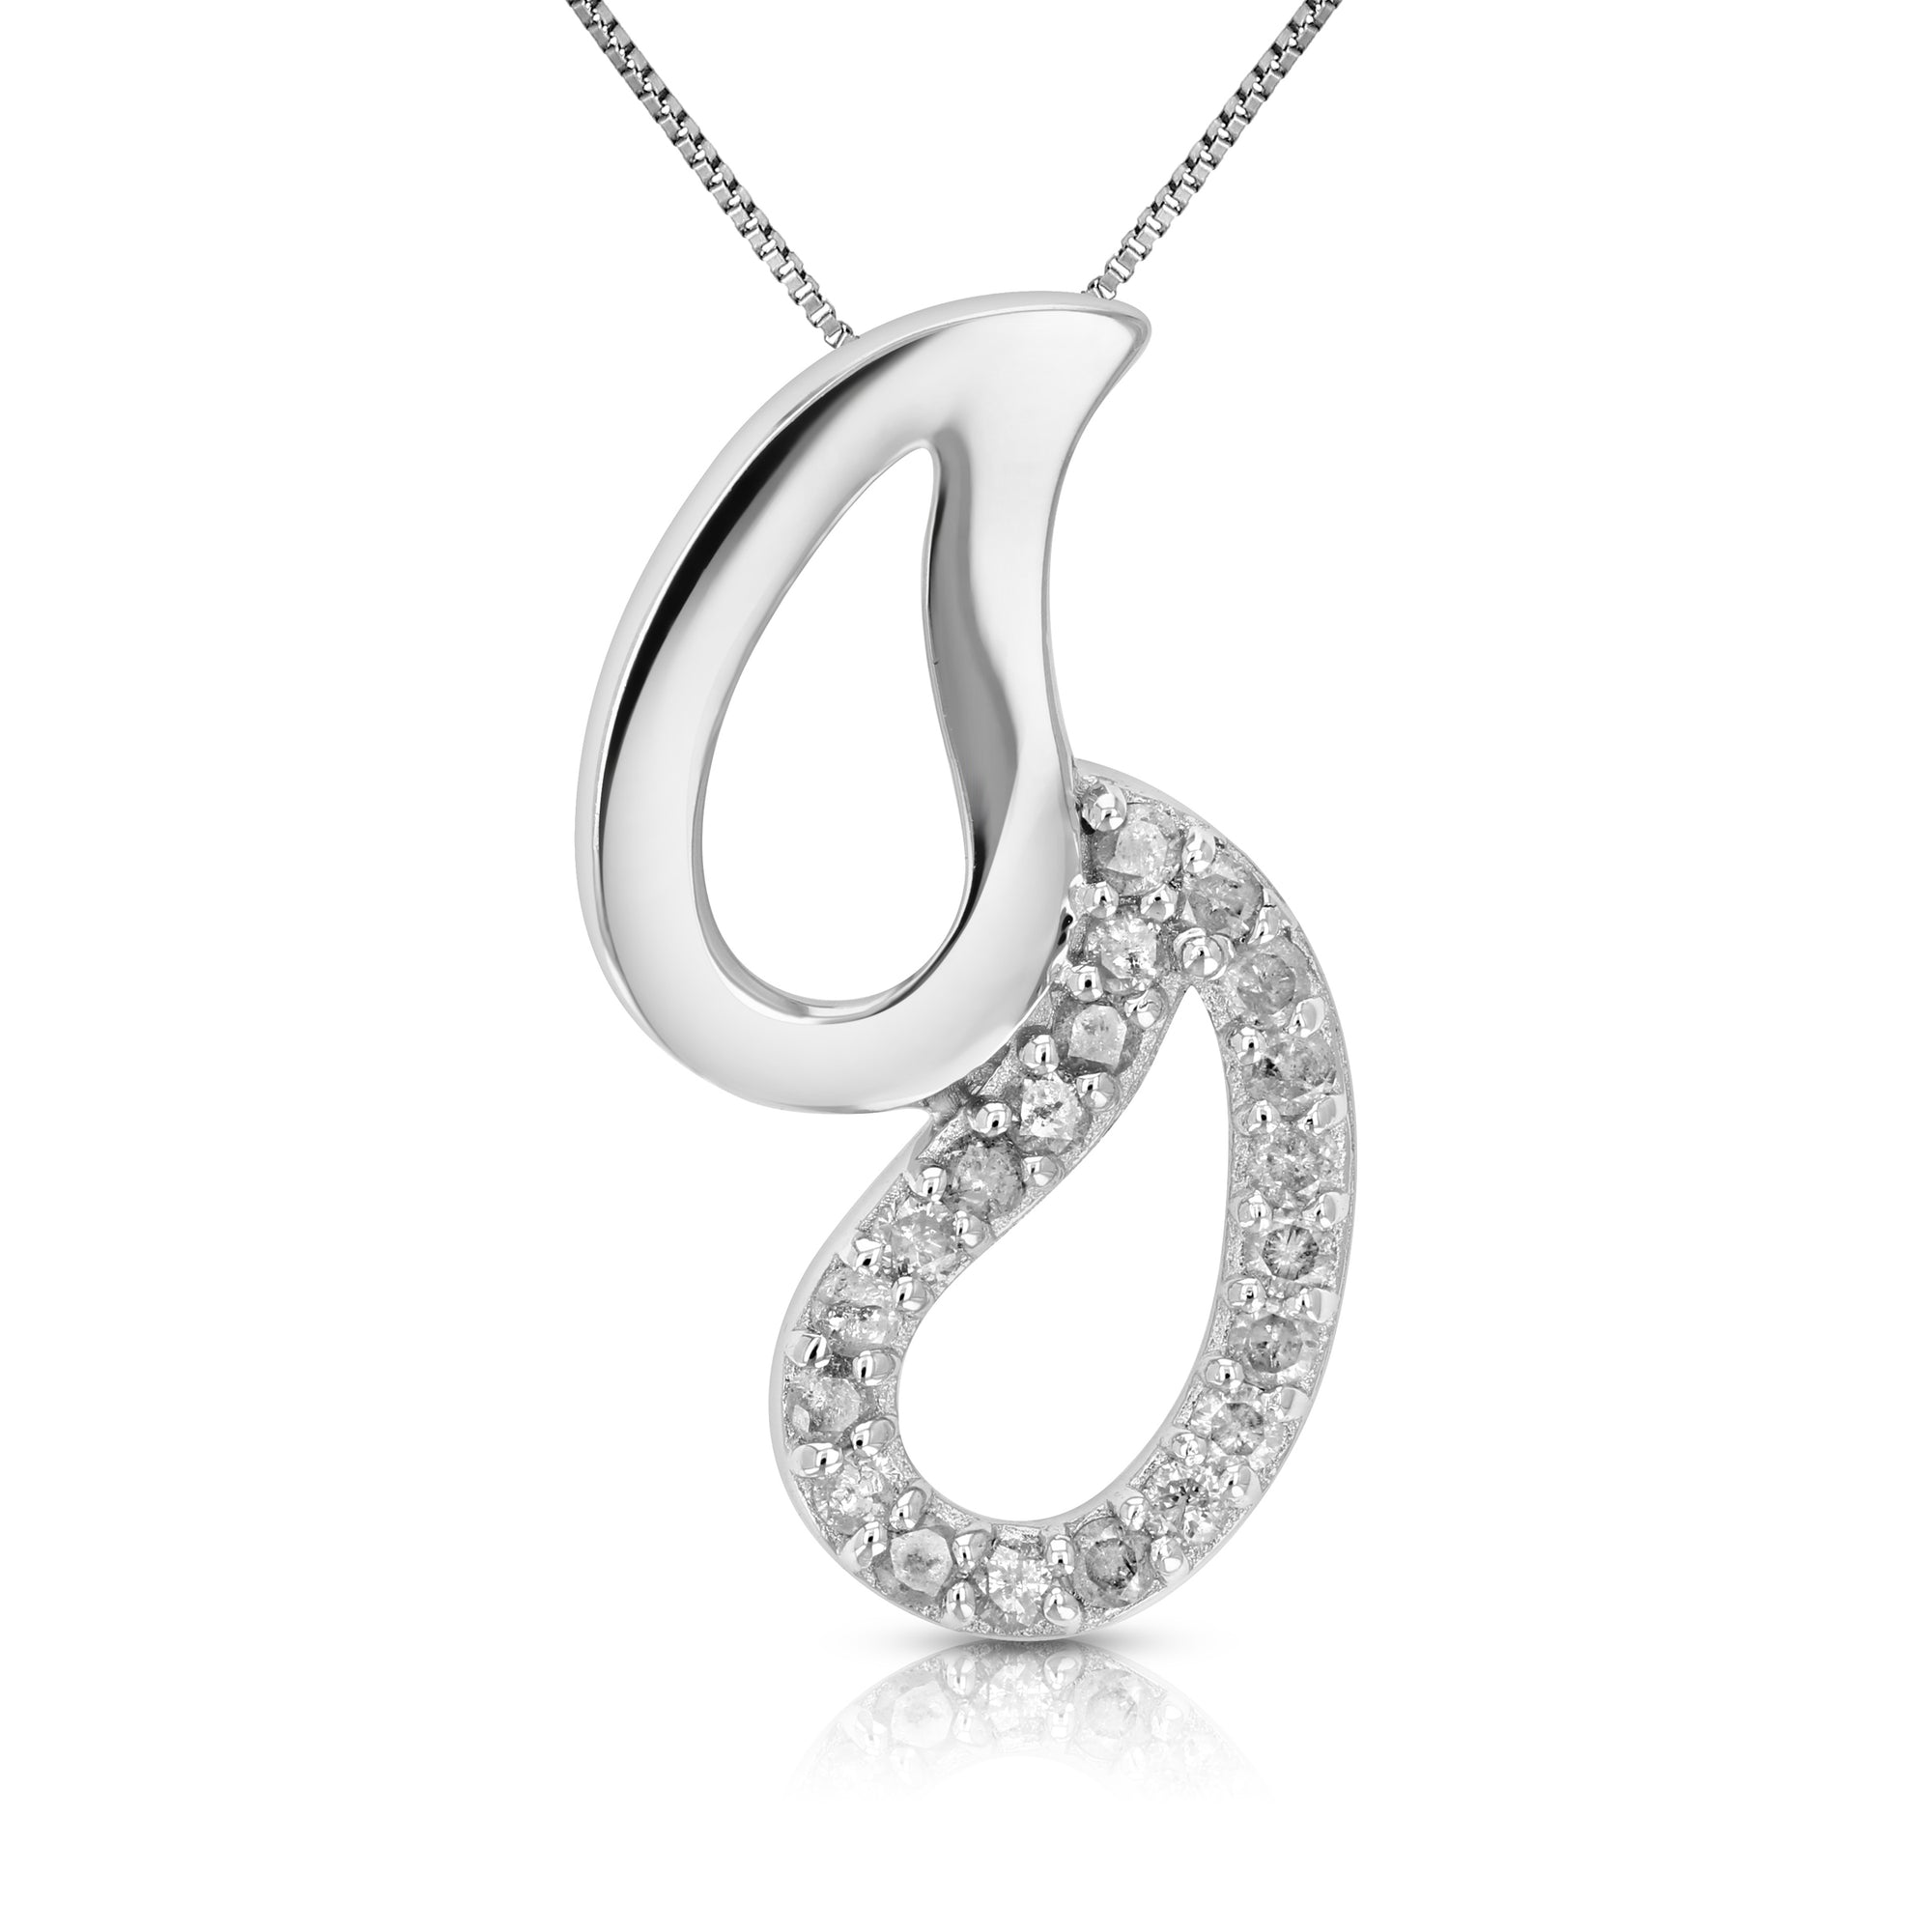 1/20 cttw Diamond Pendant Necklace .925 Sterling Silver With Rhodium With Chain